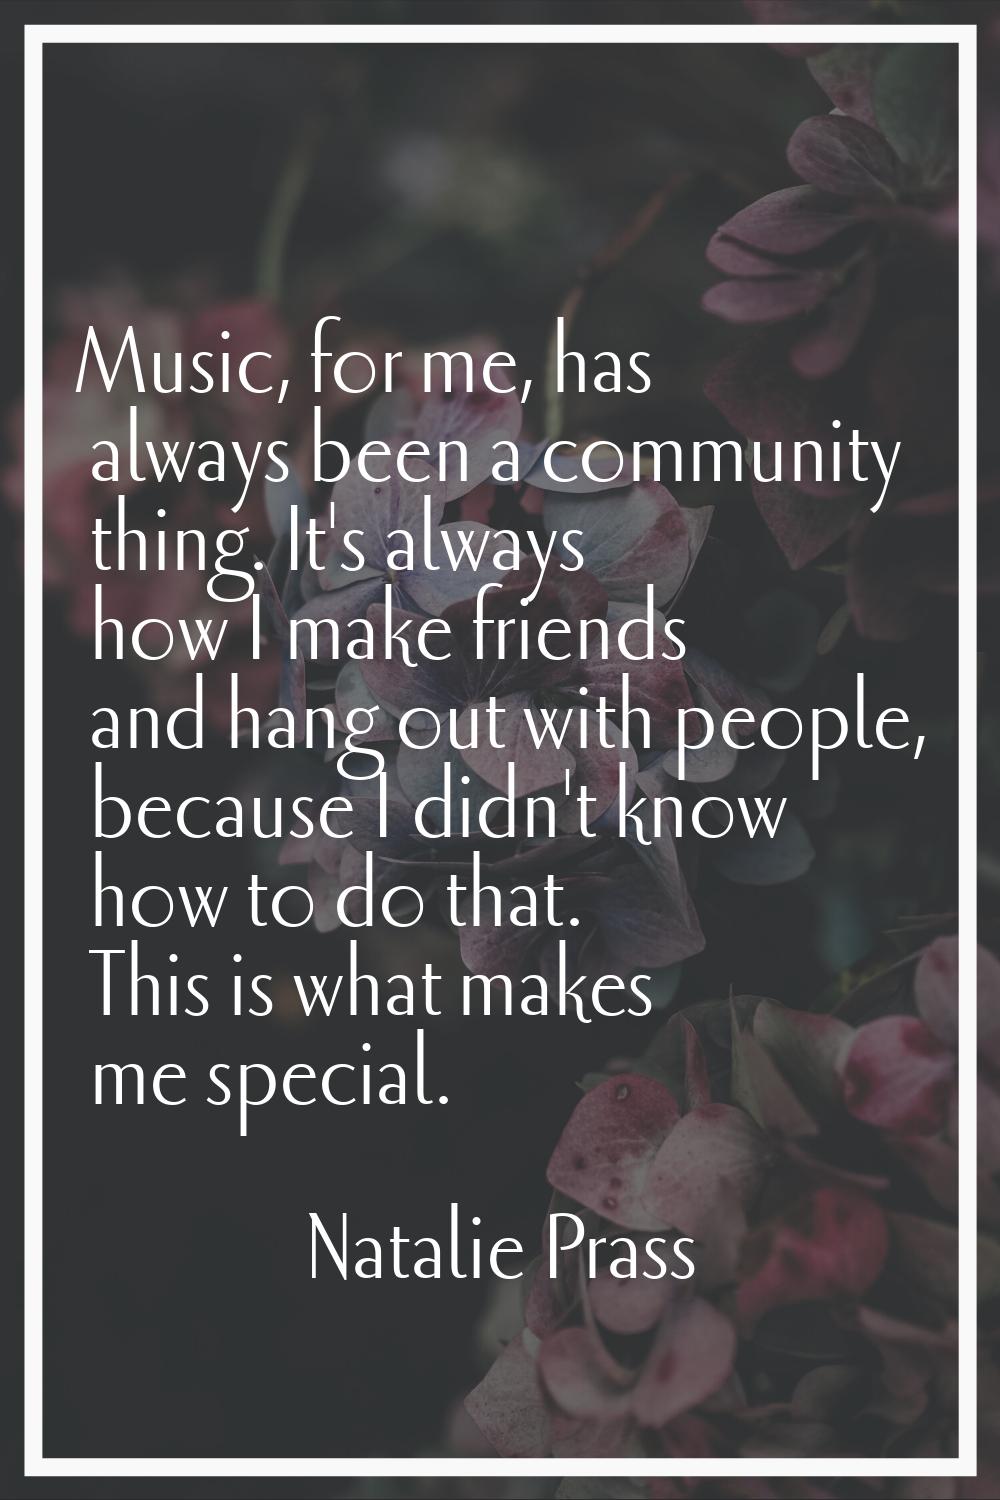 Music, for me, has always been a community thing. It's always how I make friends and hang out with 